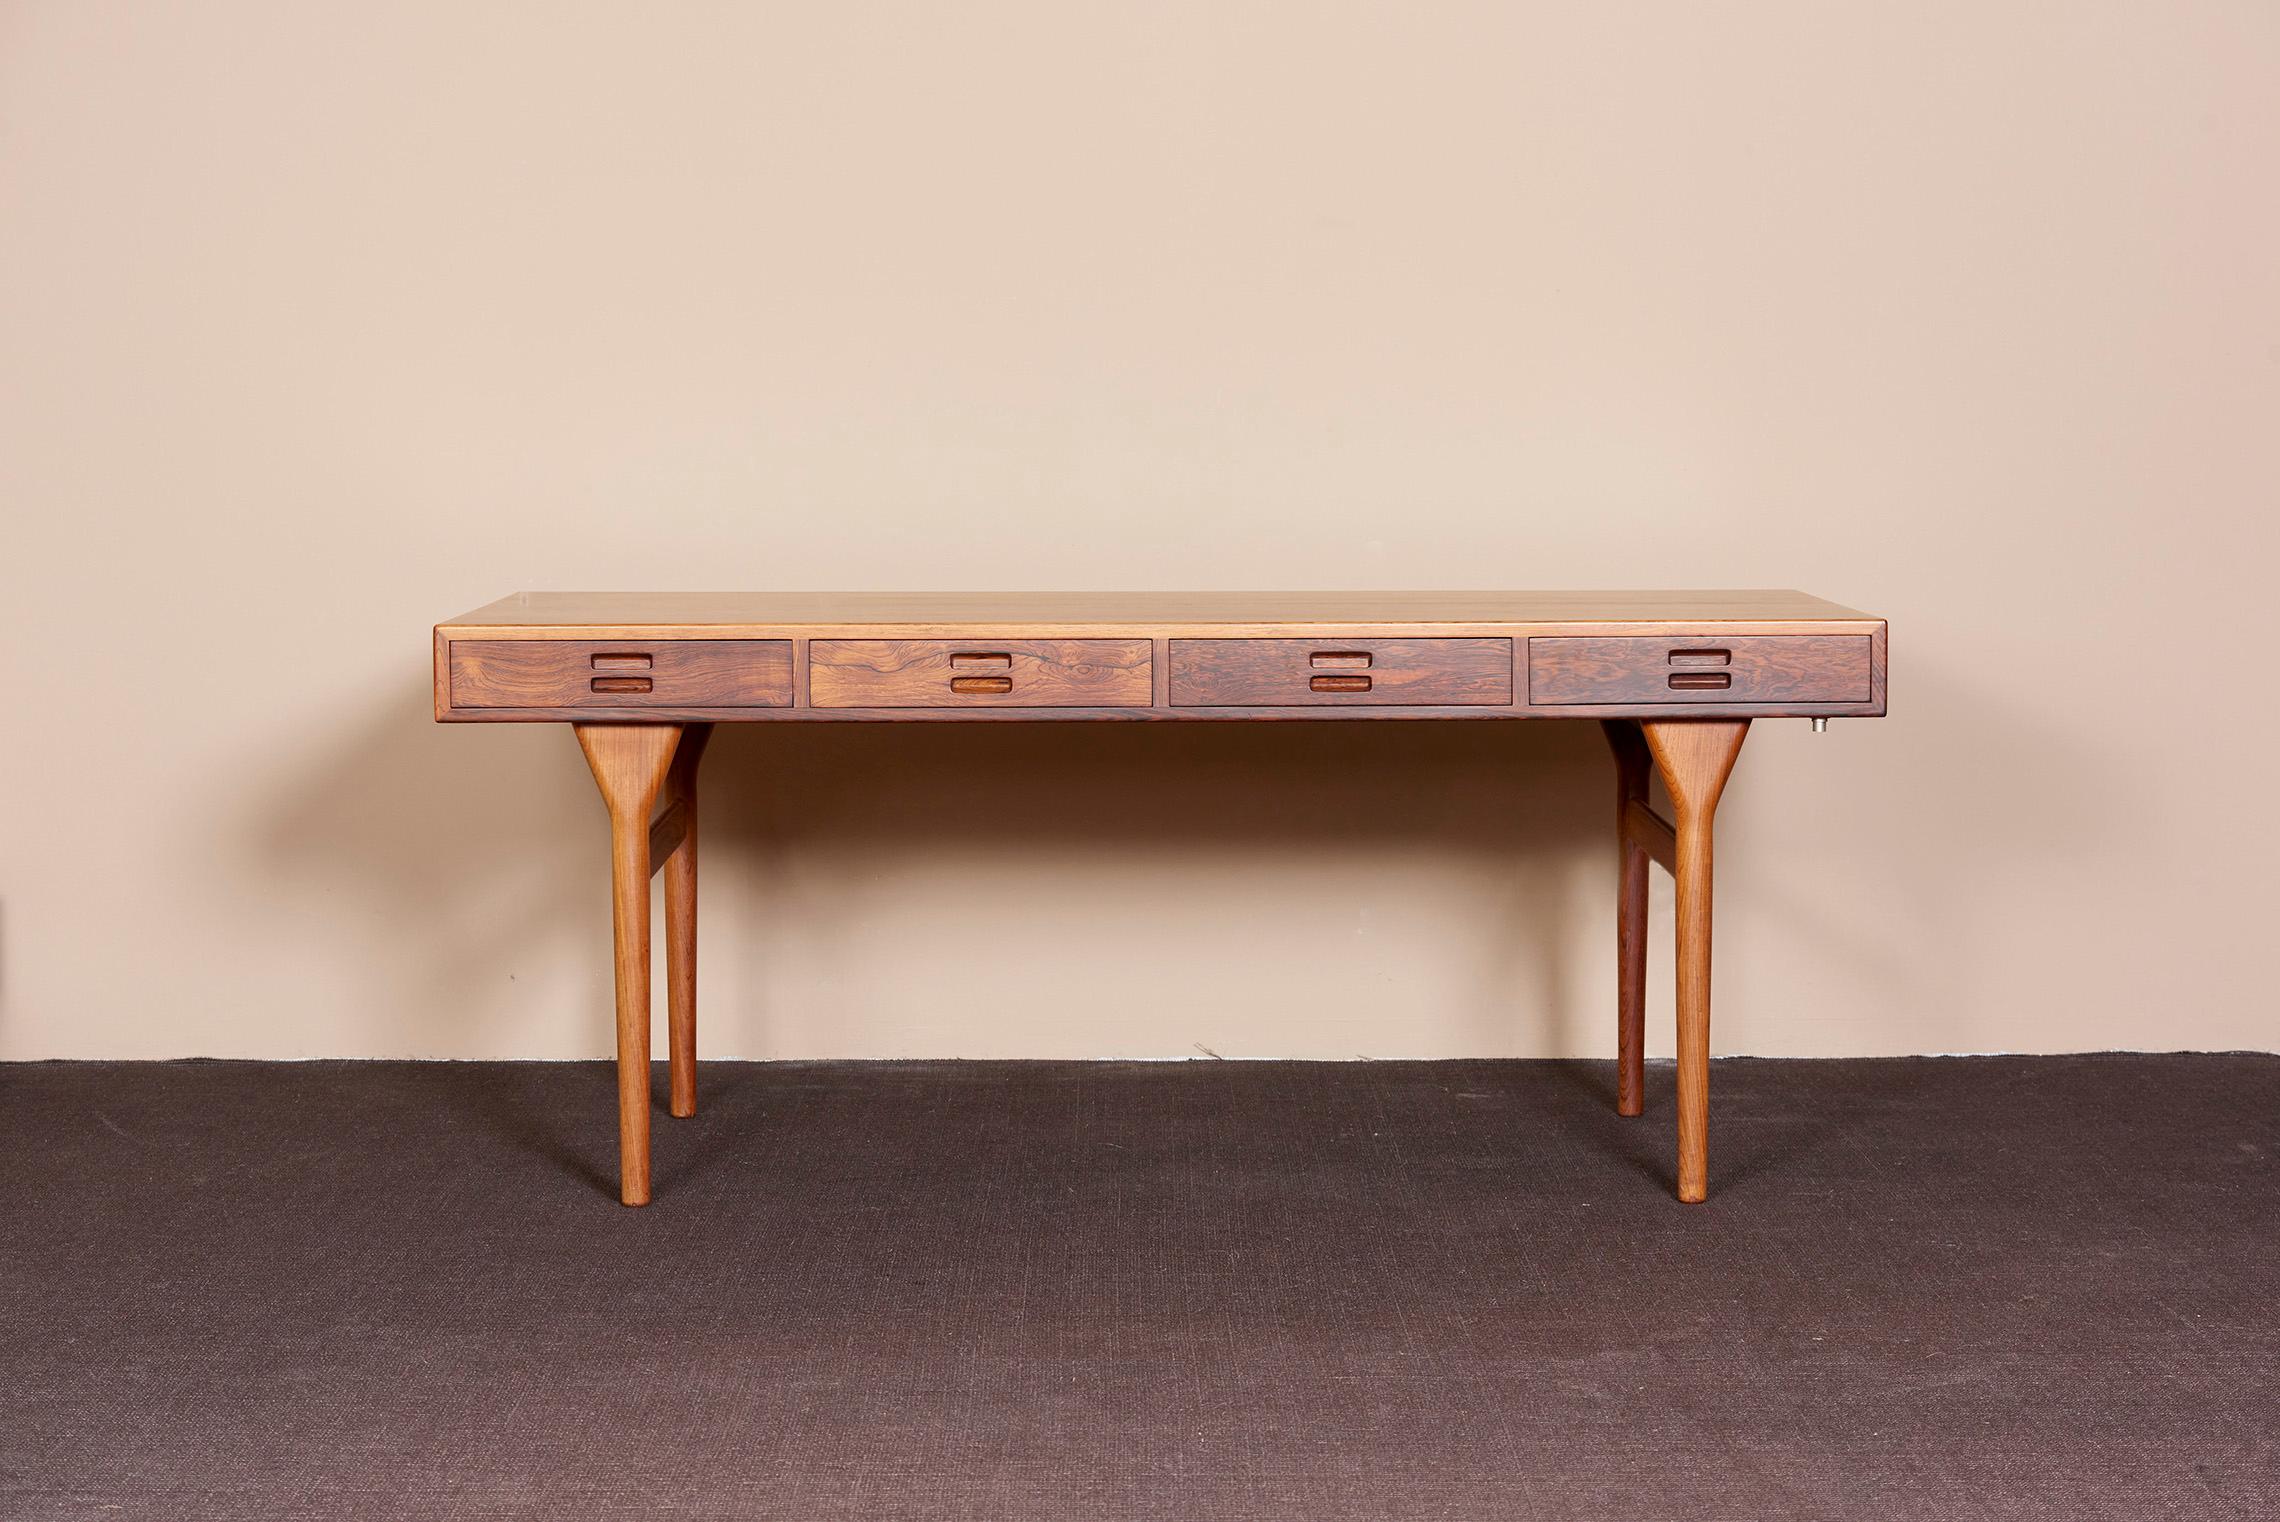 Nanna Ditzel writing desk in excellent condition, designed in 1958 and produced by Soren Willadsen Mobelfabrik.